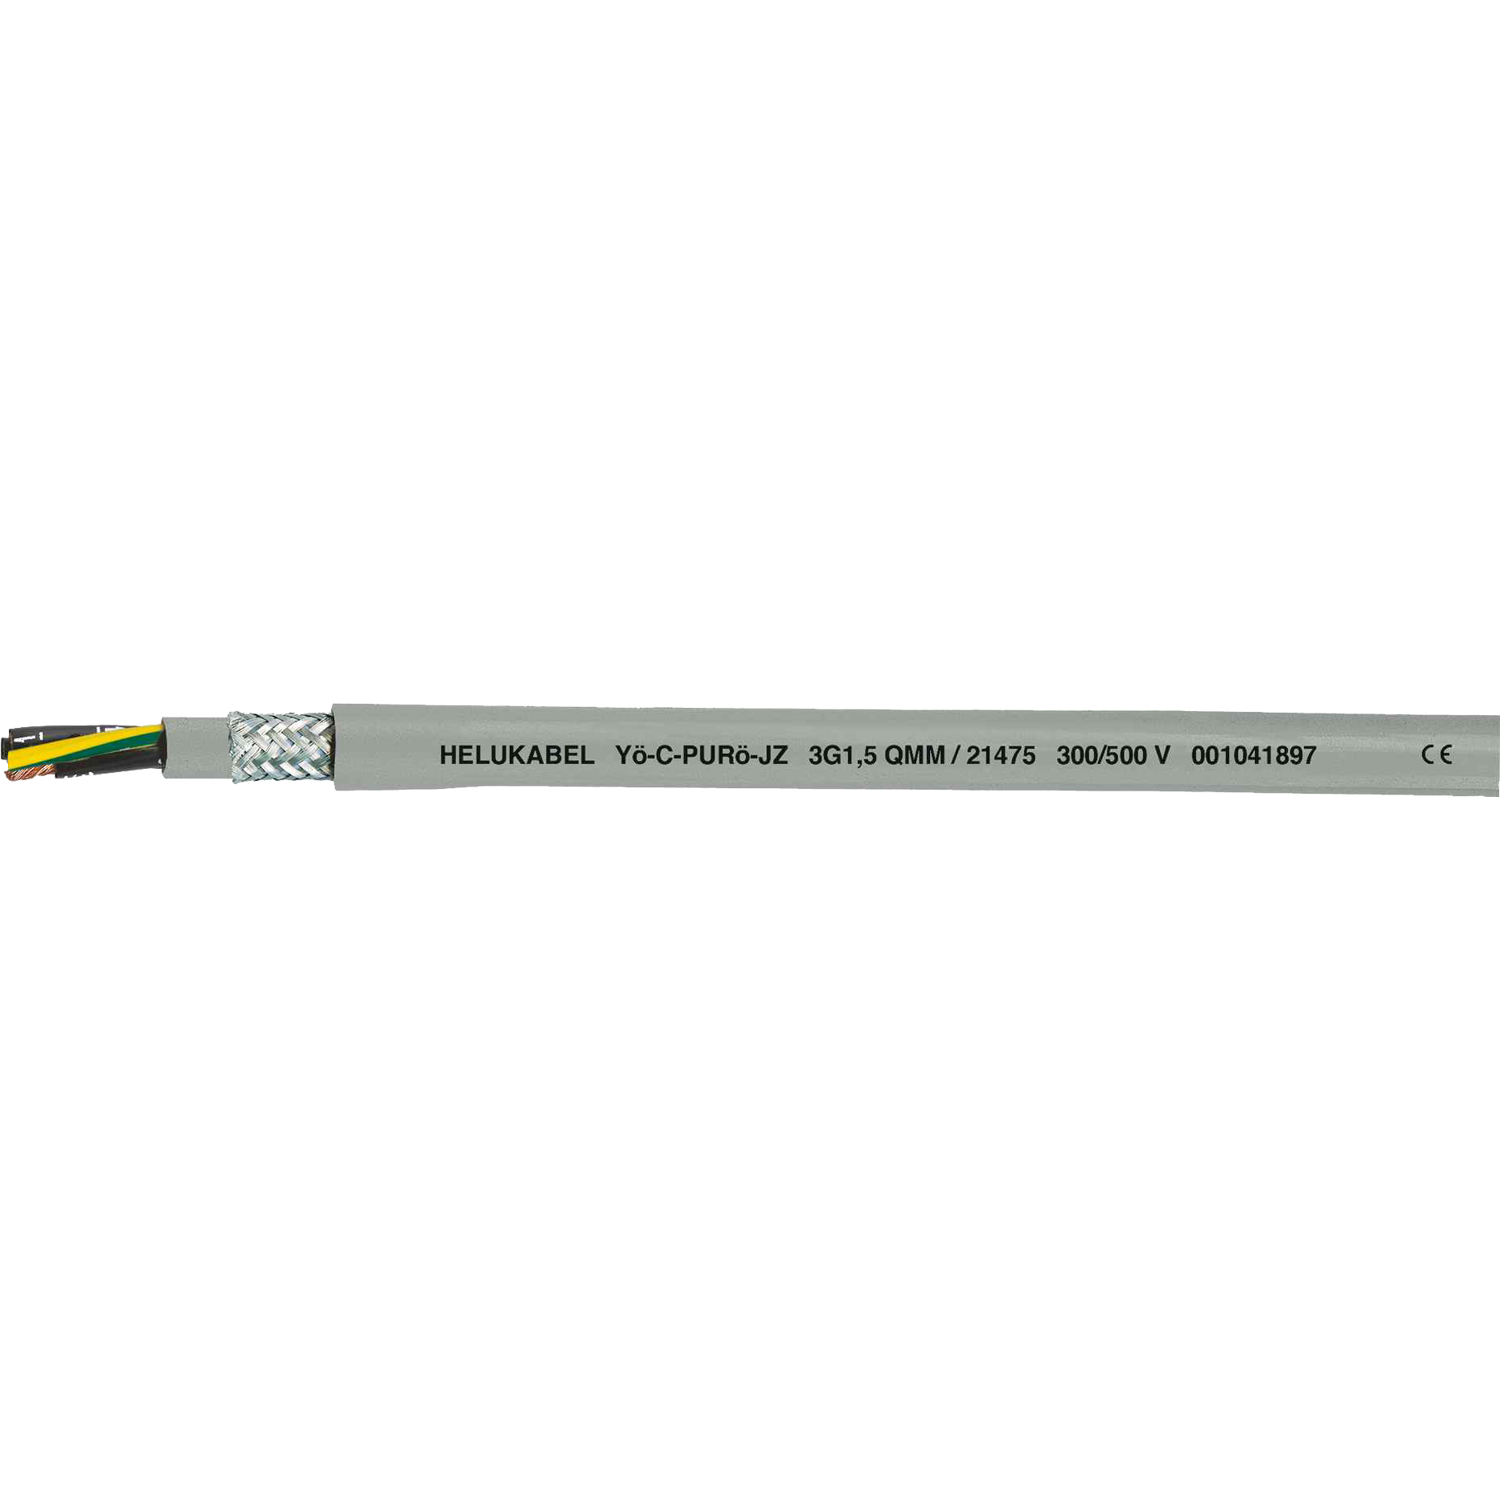 Power Cables By Helukabel Page 2 Misumi Online Shop Select Configure Order